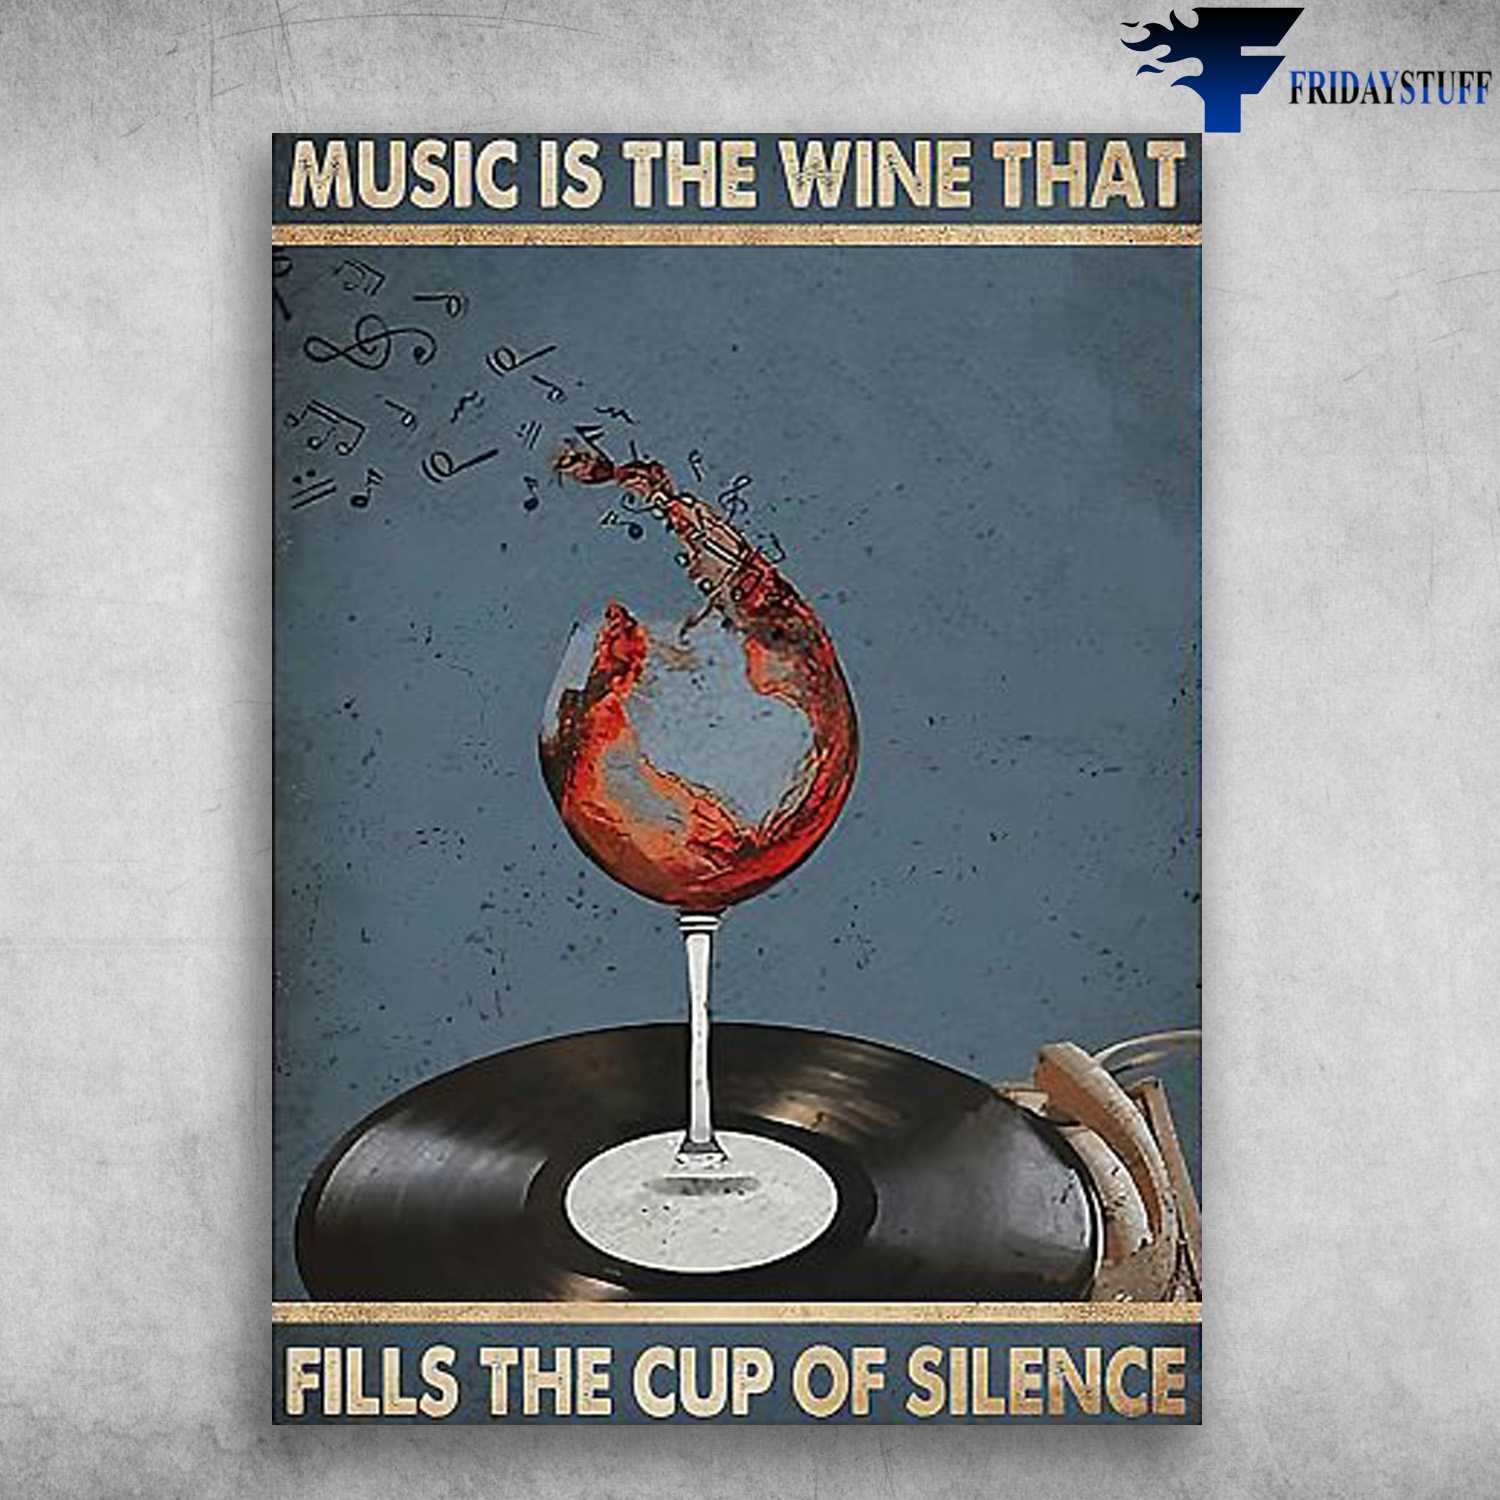 Wine Vinyl Poster - Music Is The Wine That, Fills The Cup Of Silence, Wine Music Lover